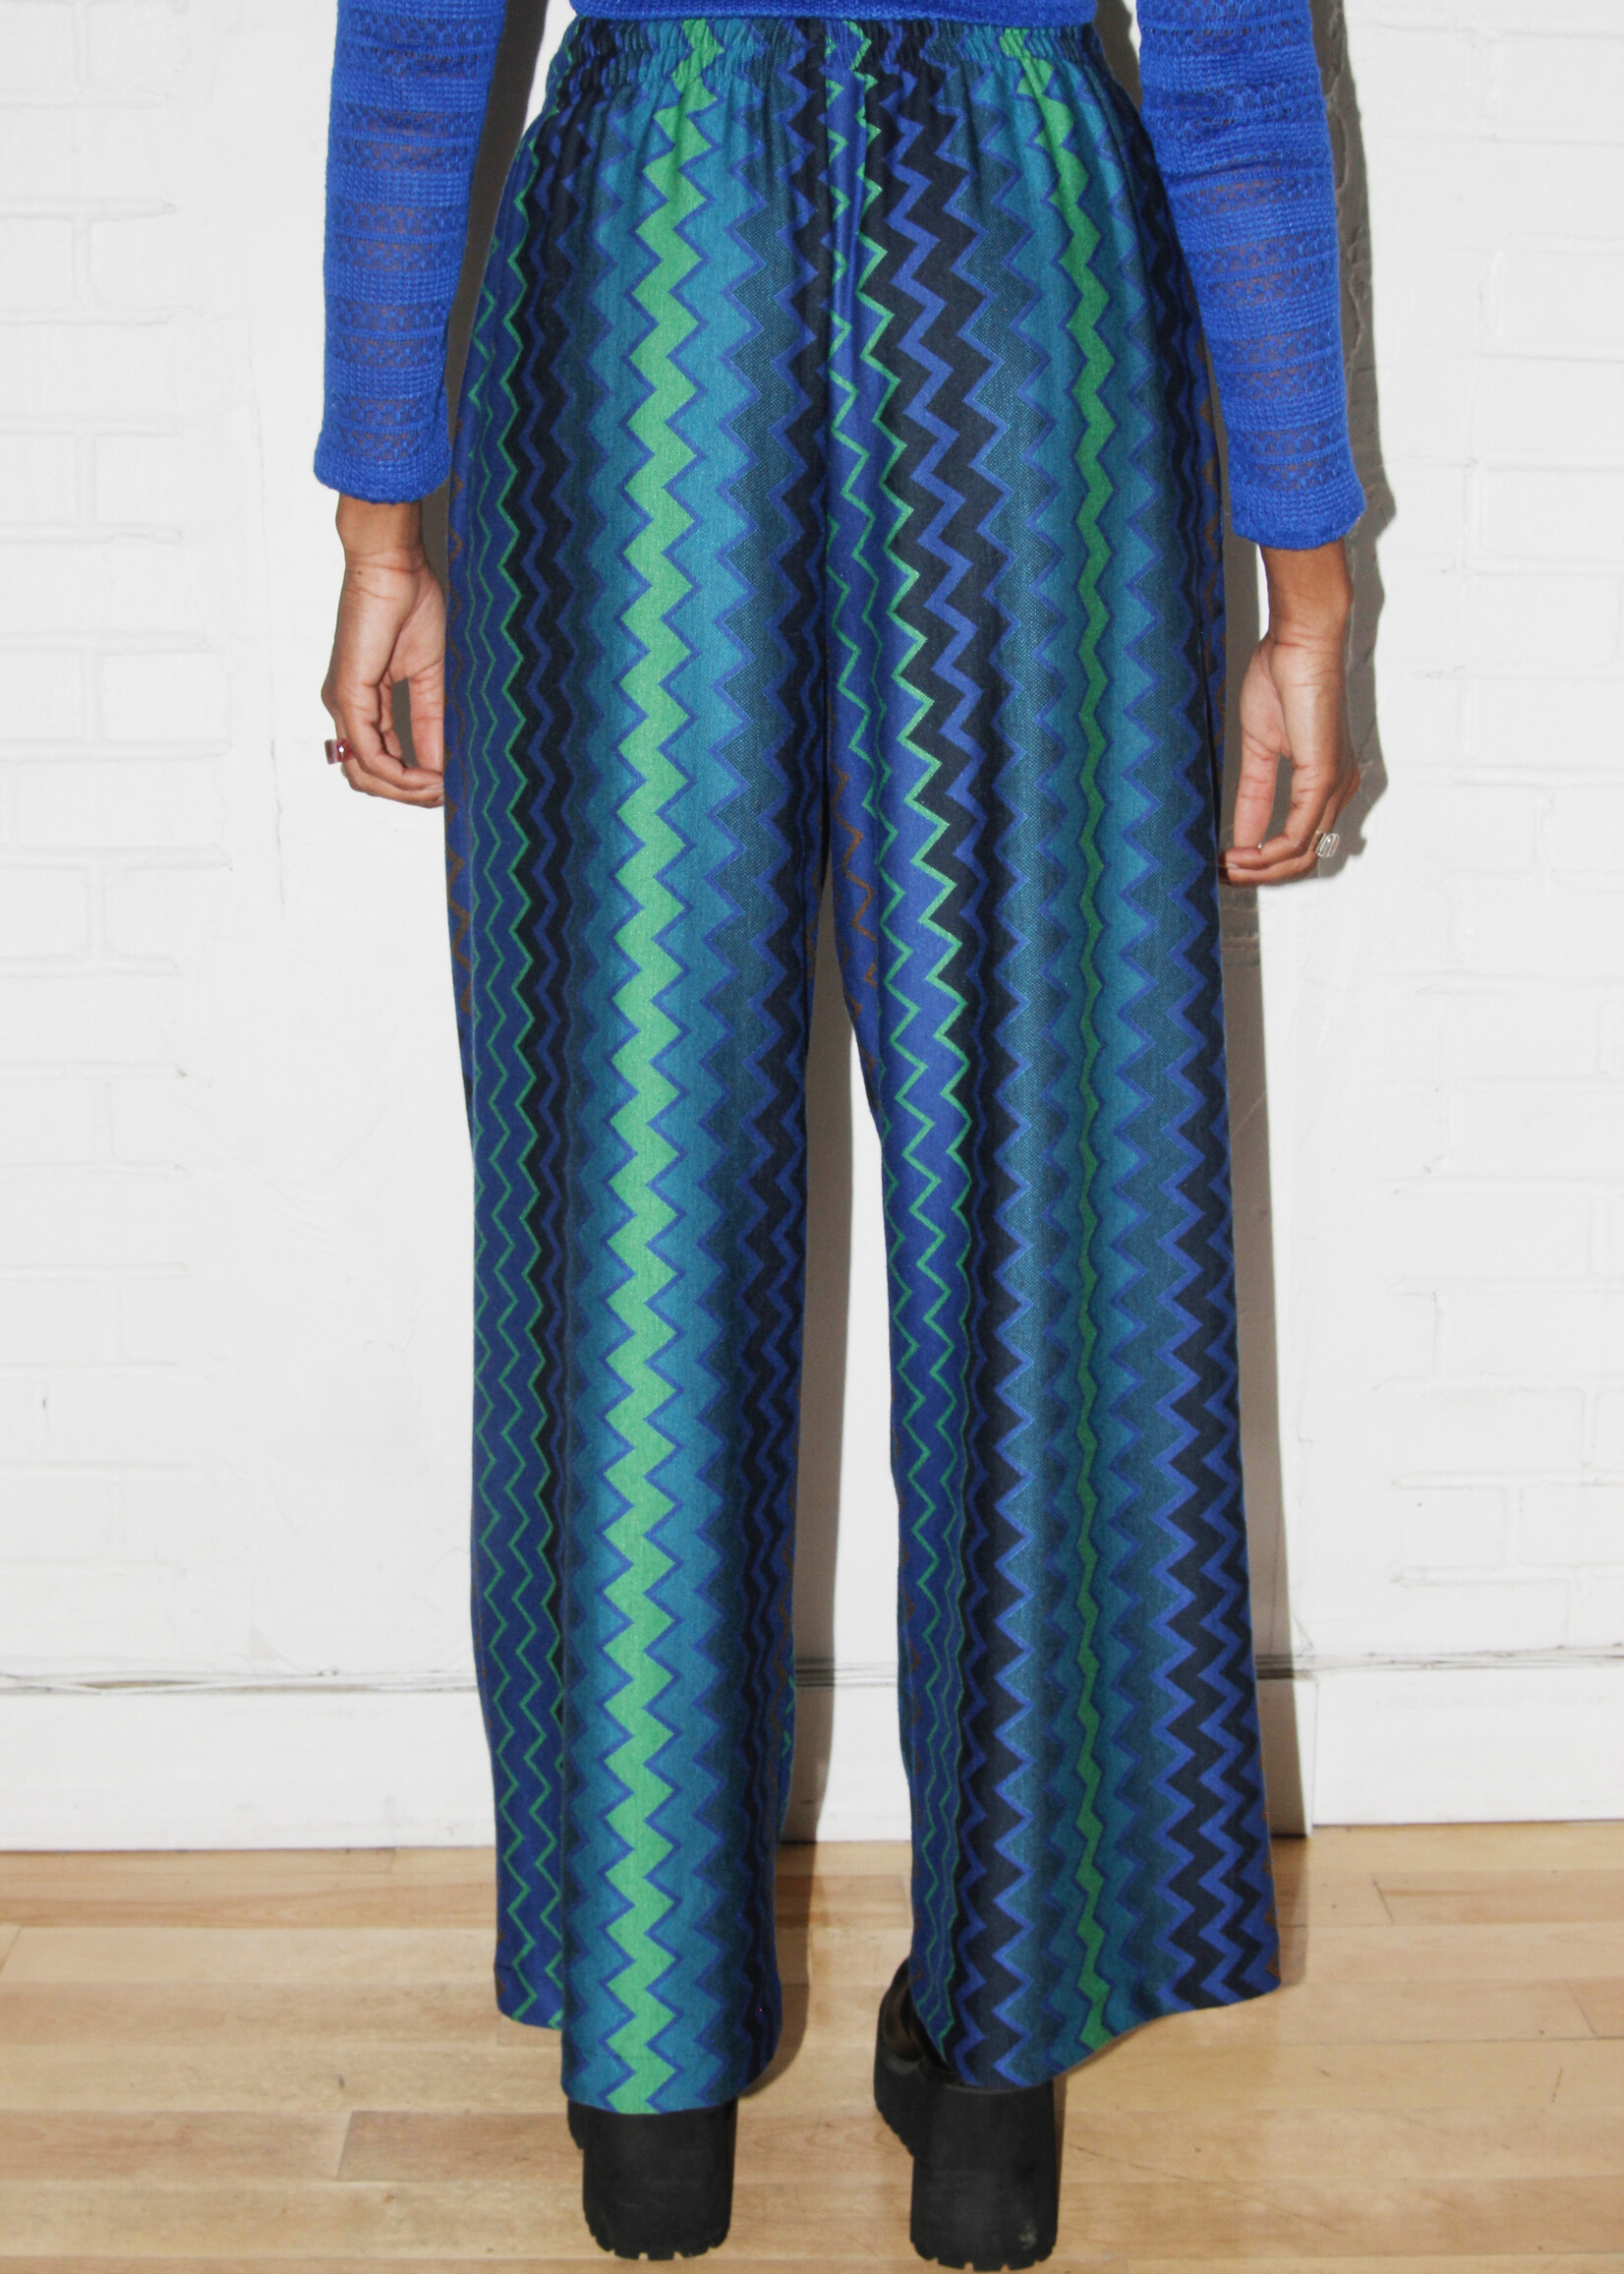 Studio Citizen Studio Citizen Relaxed Fit Drawstring Pant in Blue, Green and Brown Zig Zag